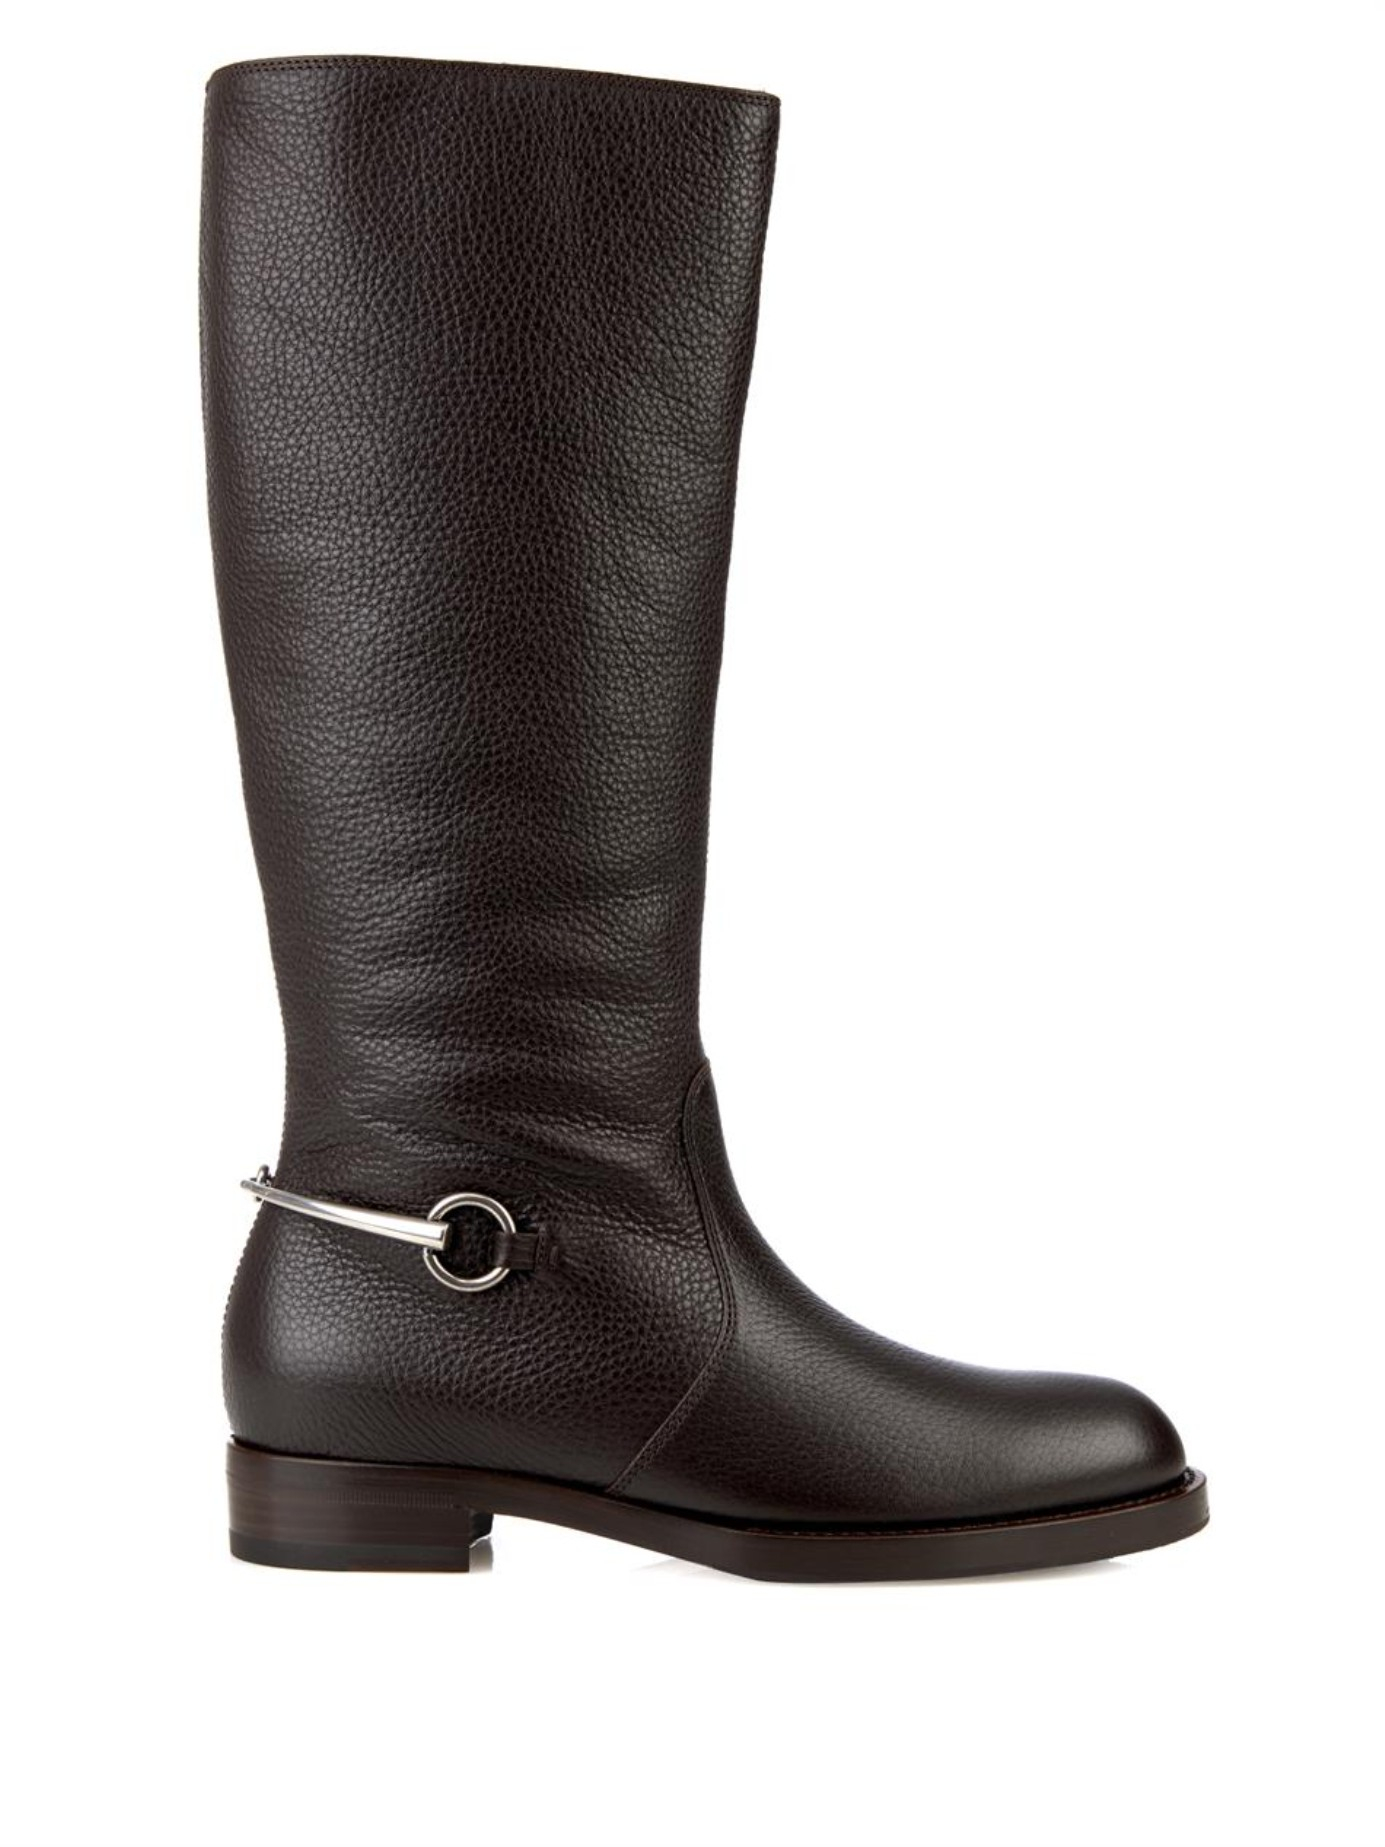 Gucci Horsebit Leather Riding Boots in Brown - Lyst